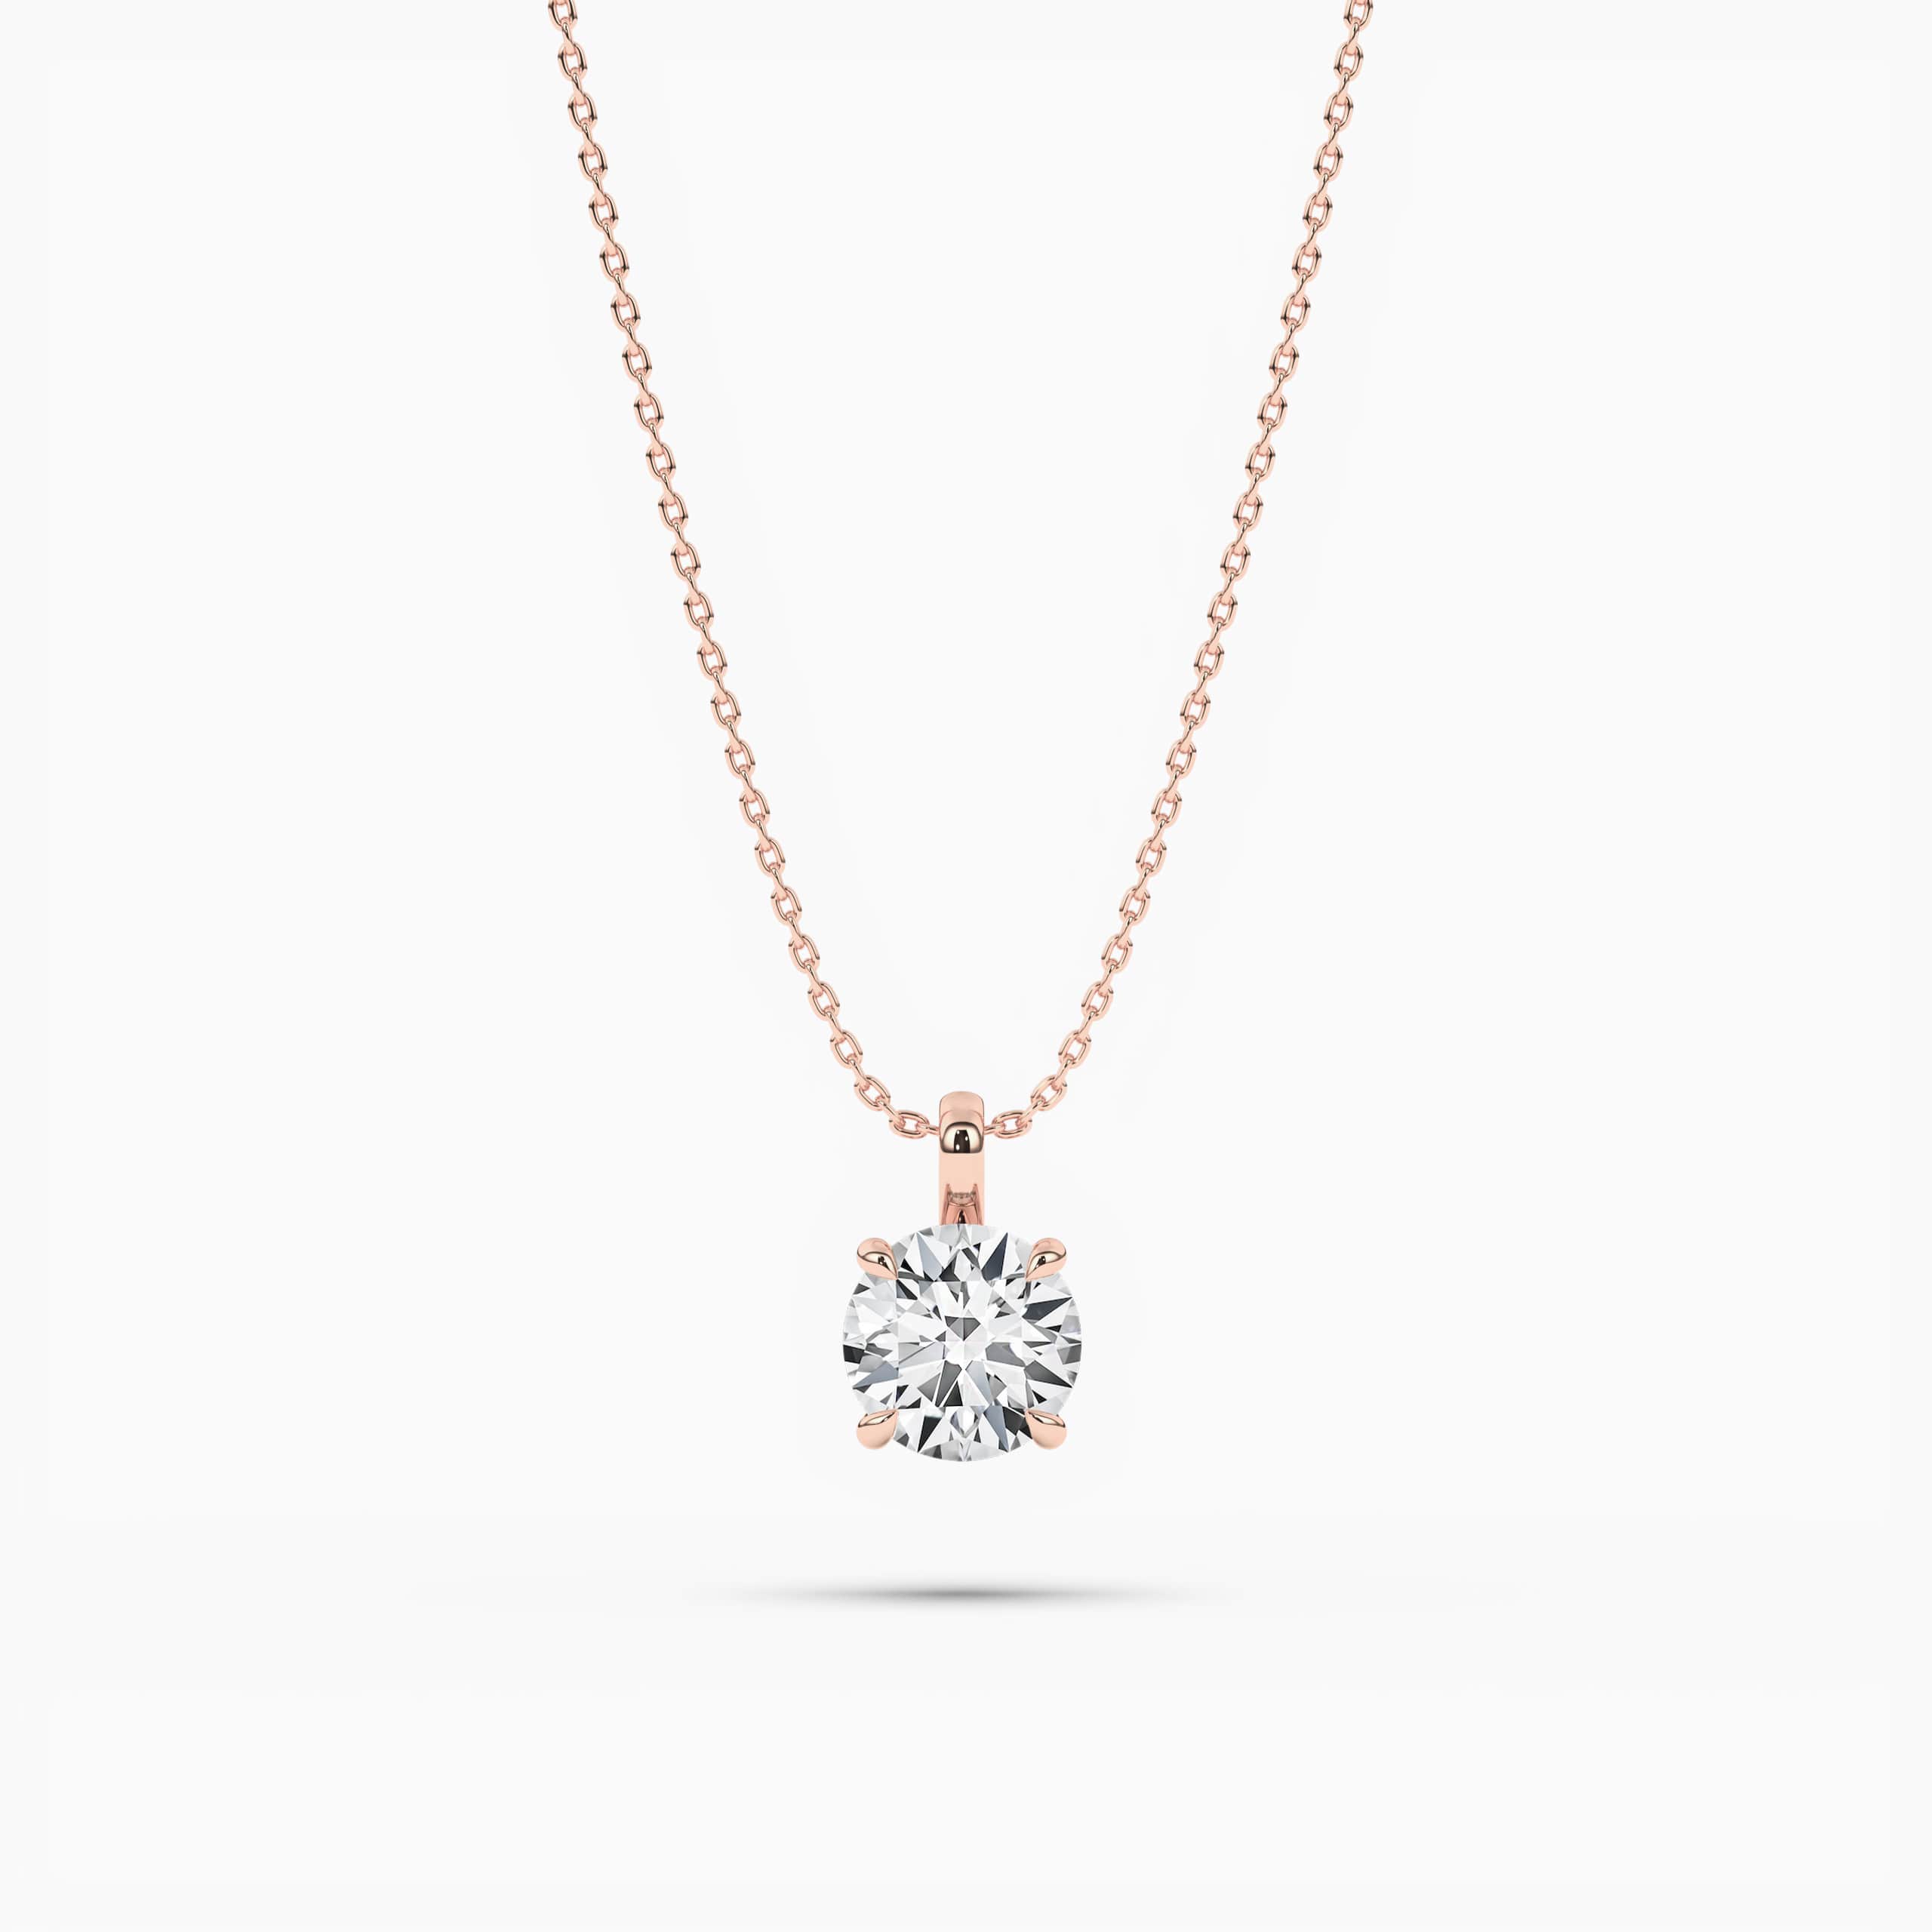 solitaire pendant in Rose  gold with round diamond and four prongs